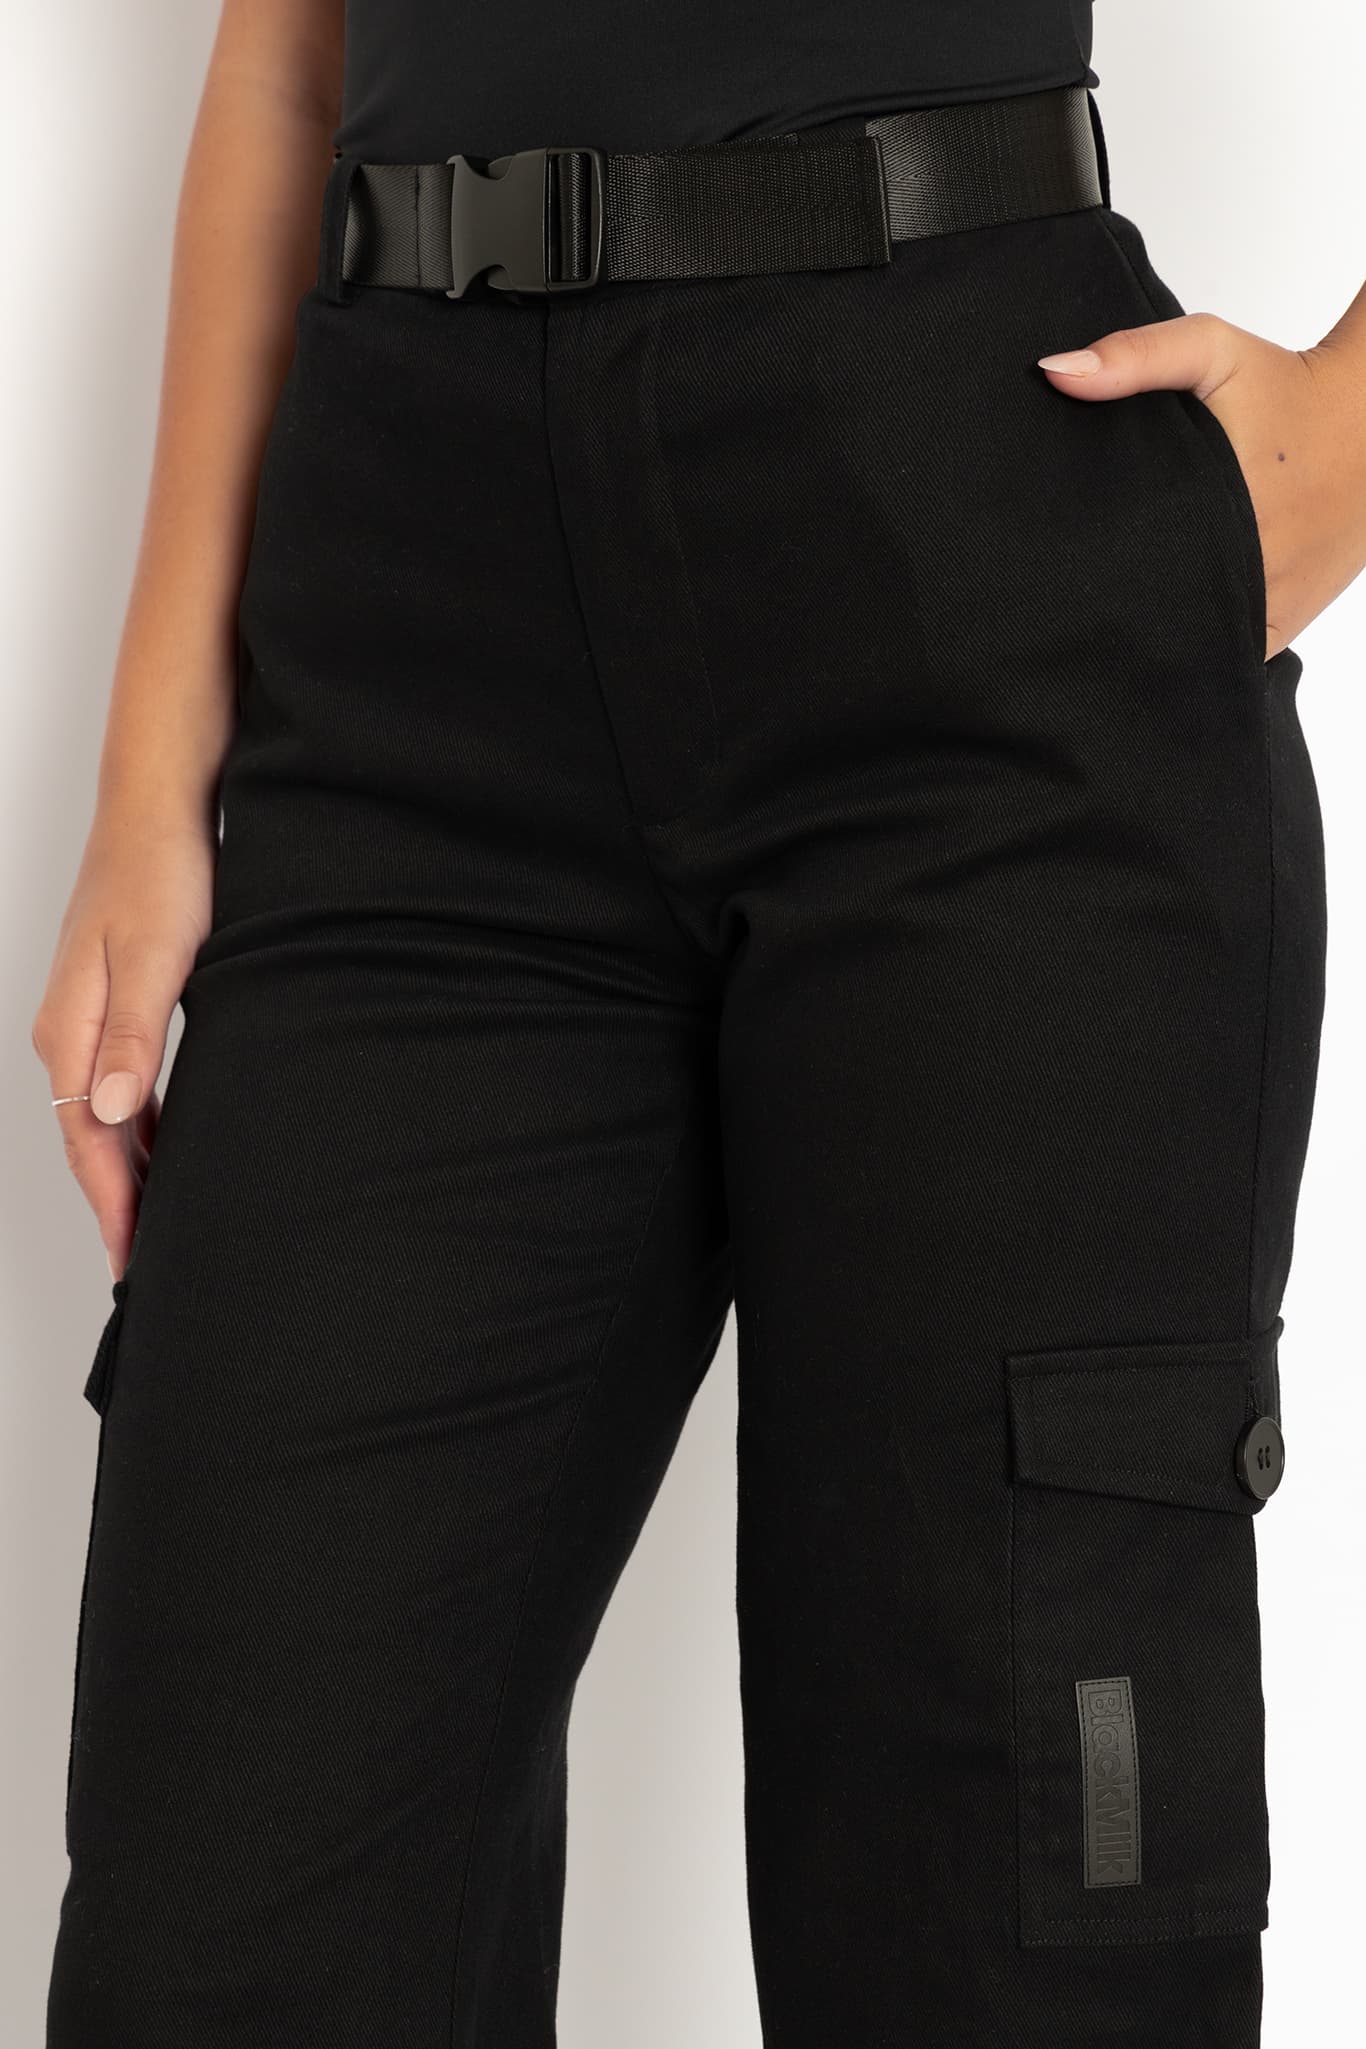 Lilly Black Straight Fit High Waist Cargo Pants  LA CHIC PICK